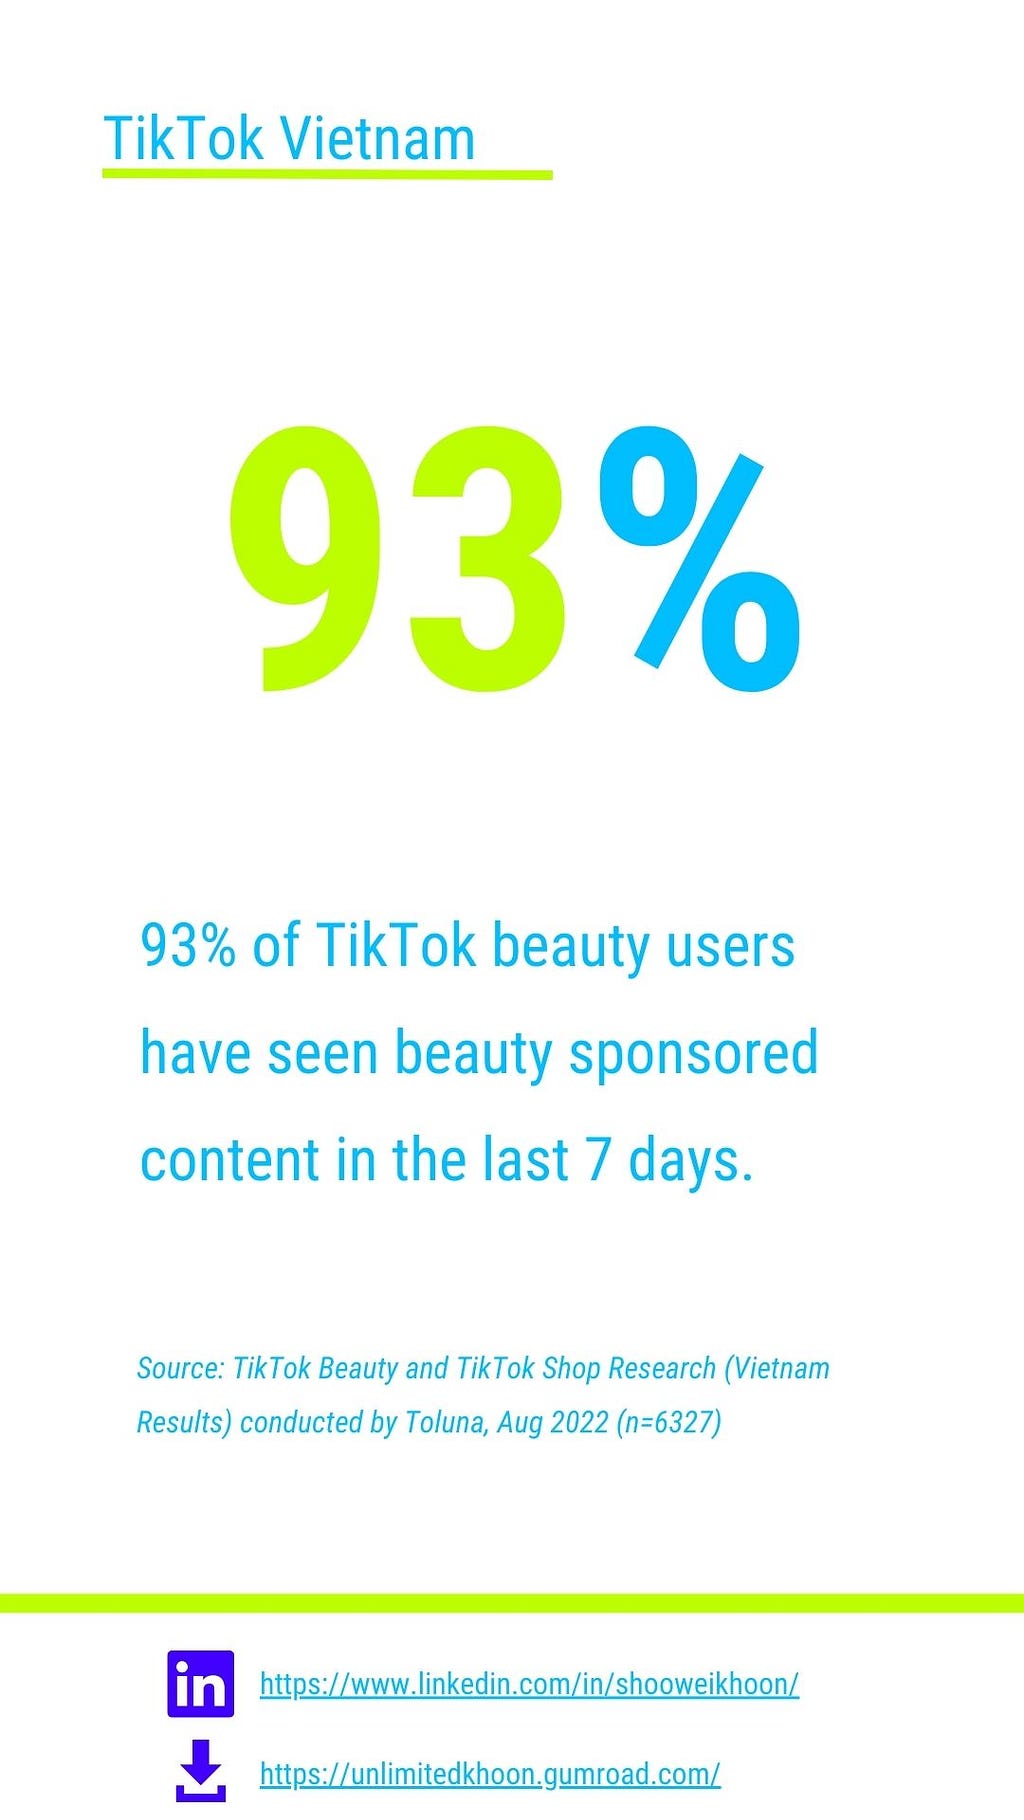 93% of VN TikTok beauty users have seen beauty sponsored content in the last 7 days.